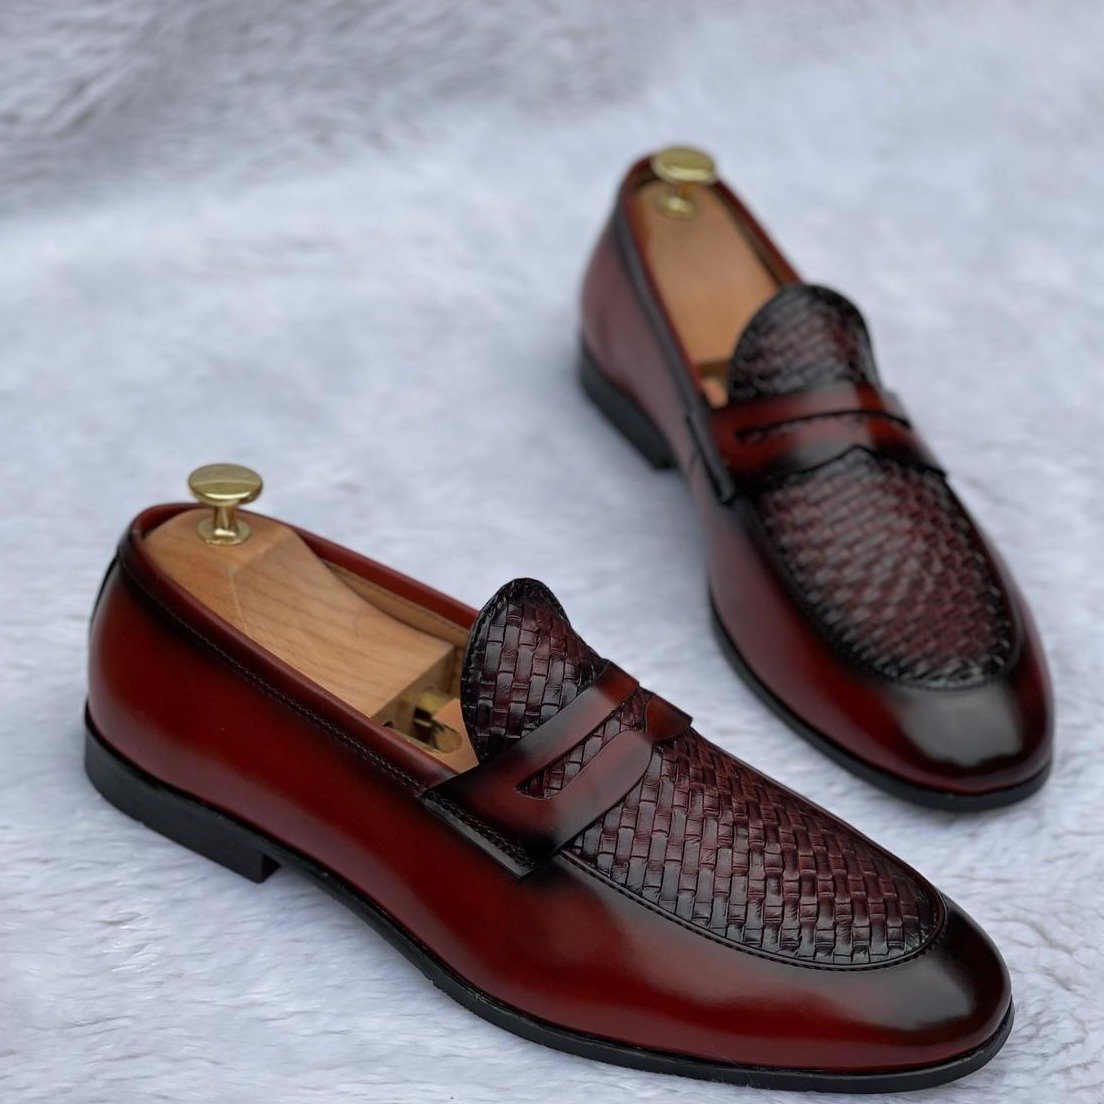 New Woven Moccasin Loafer For Office Wear And Casual Wear-Unique and Classy